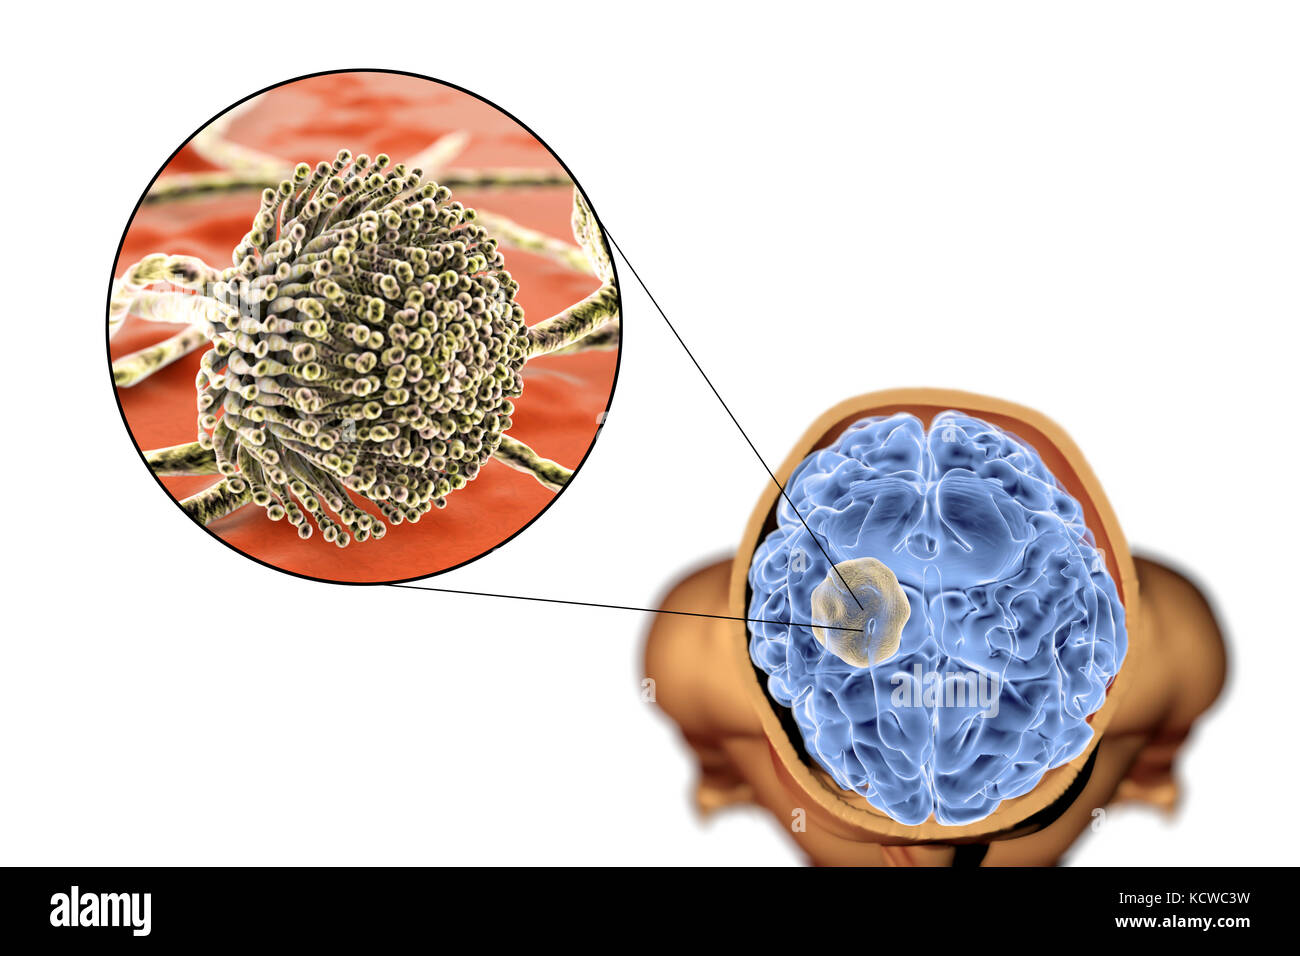 Aspergilloma of the brain and close-up view of Aspergillus fungi, computer illustration. Also known as mycetoma, or fungus ball, this is an intracranial lesion produced by Aspergillus fungi in immunocompromised patients. Stock Photo